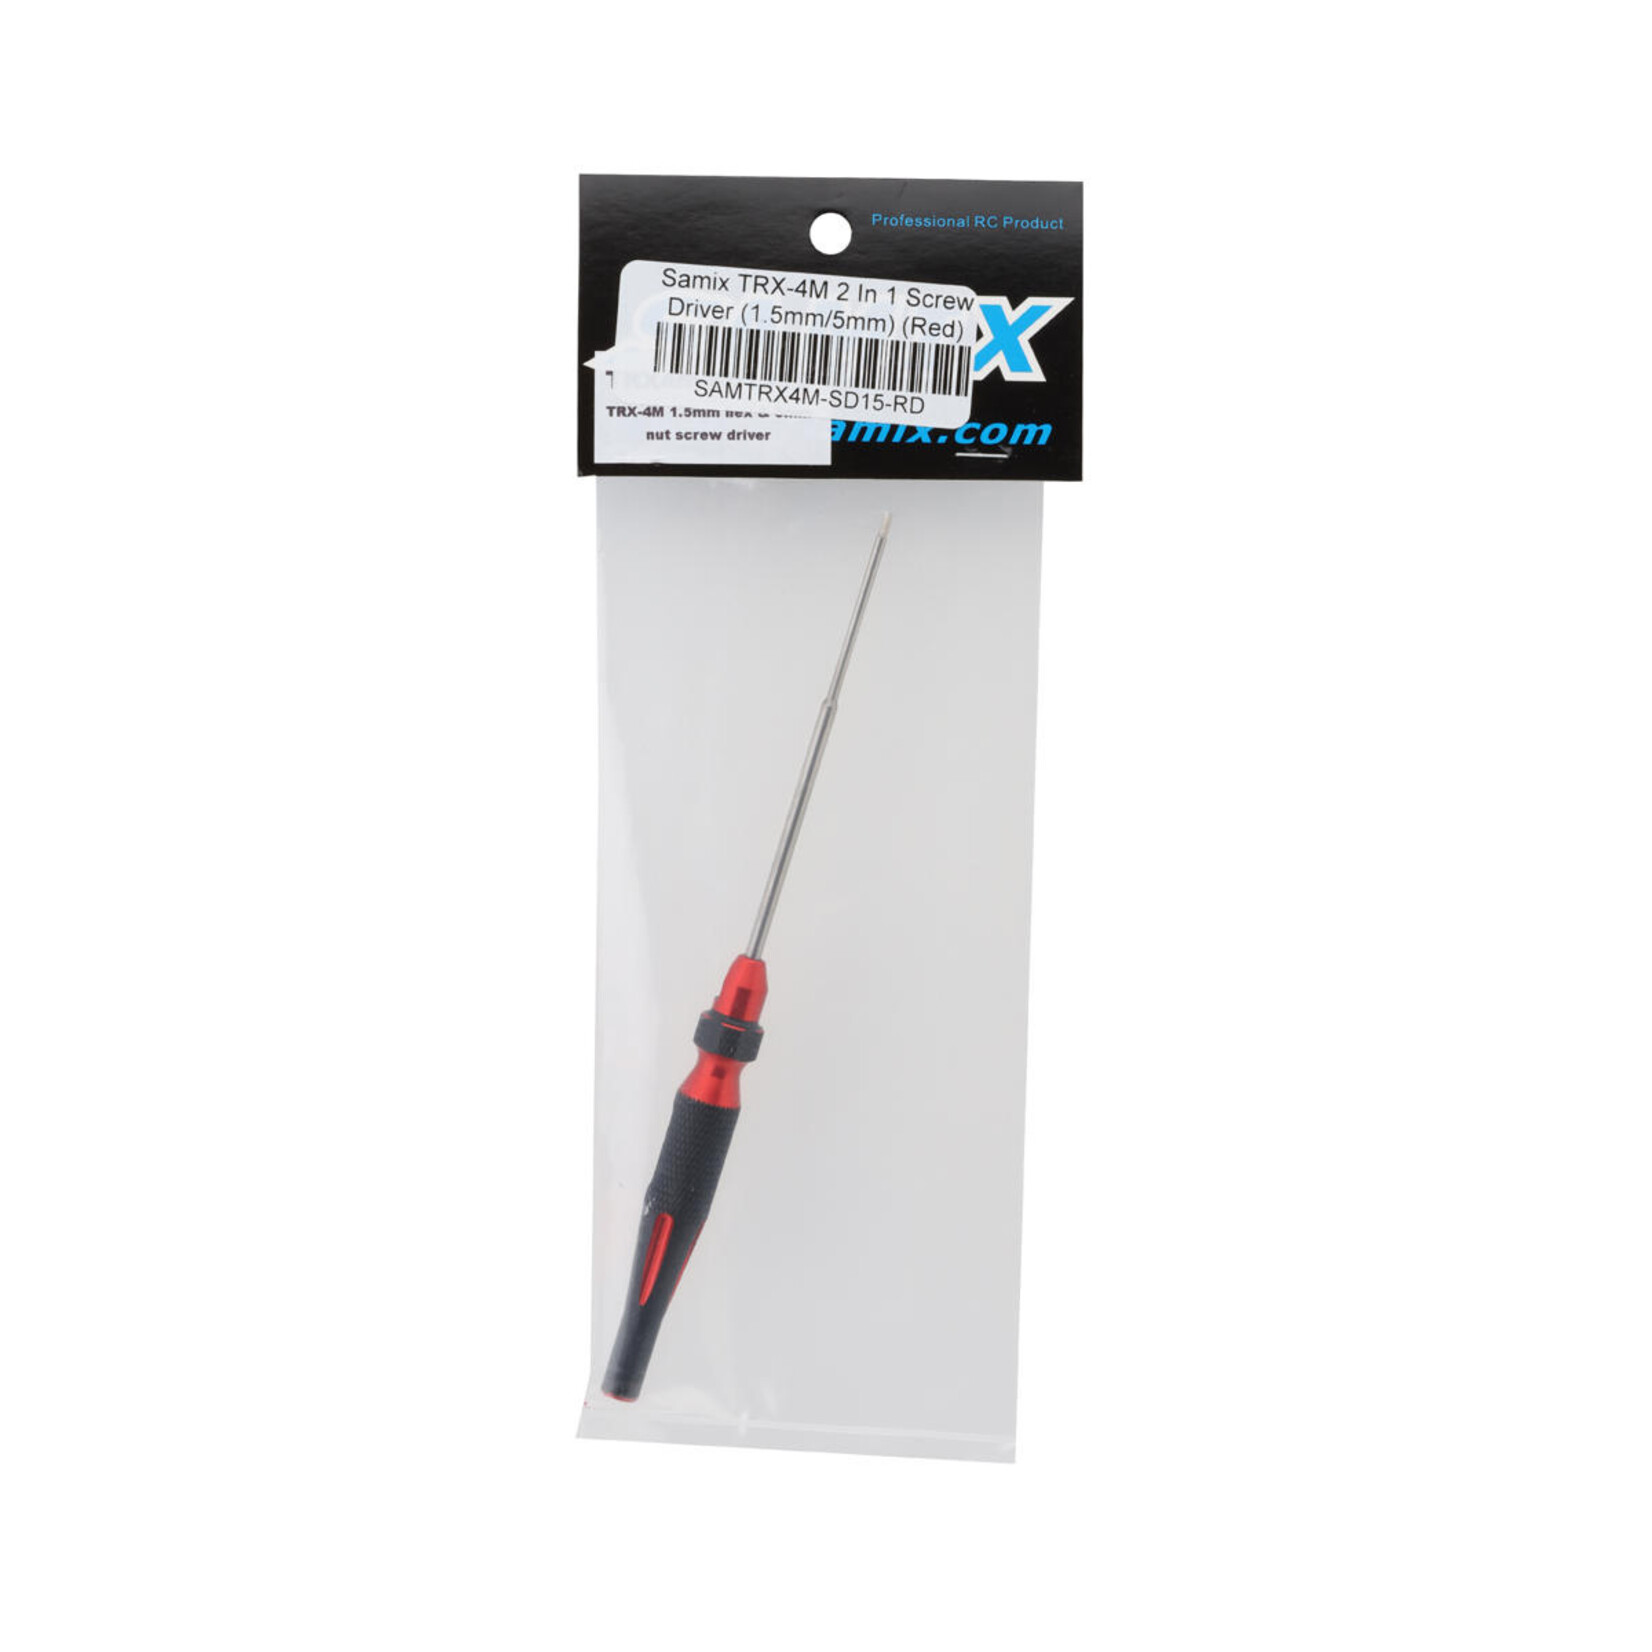 Samix Samix TRX-4M 2-in-1 Hex Wrench/Nut Driver (Red) (1.5mm Hex/5mm Nut)  #SAMTRX4M-SD15-RD